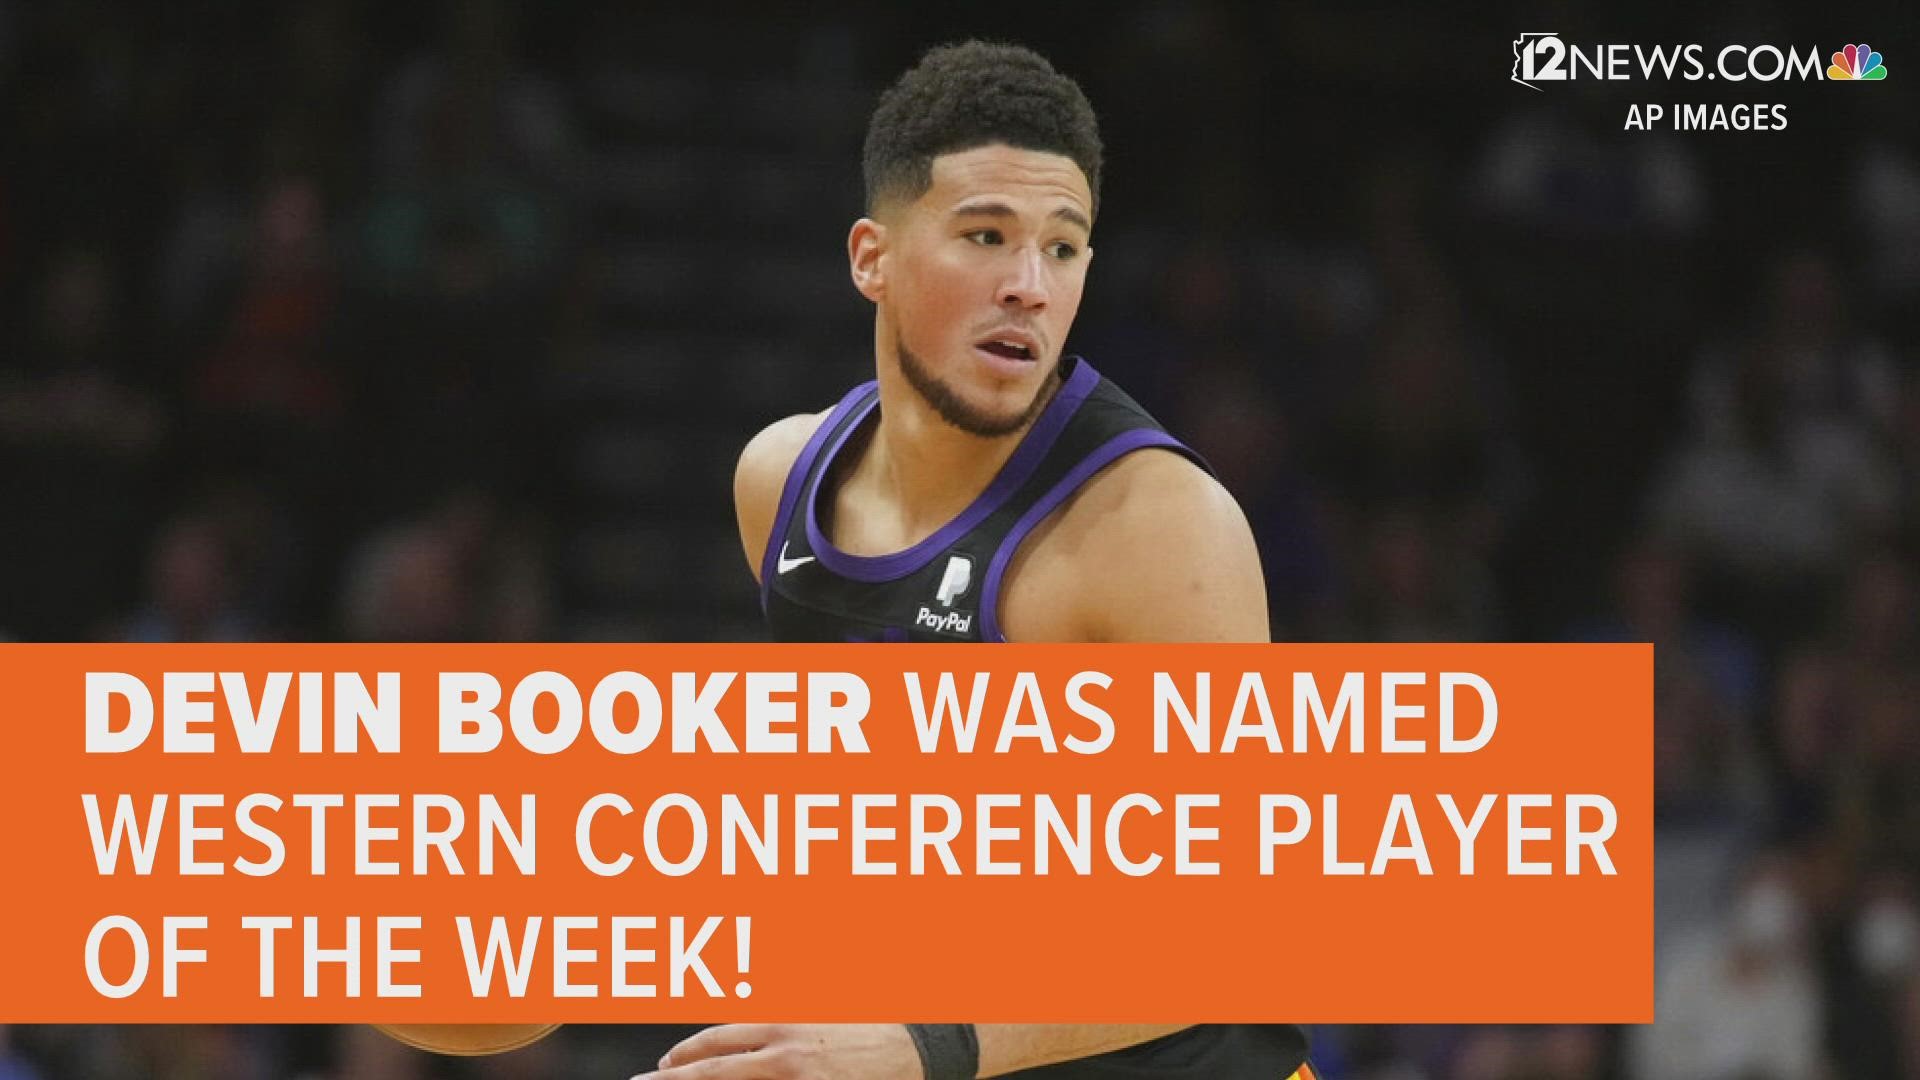 Phoenix Suns guard Devin Booker rubs the Western Conference trophy